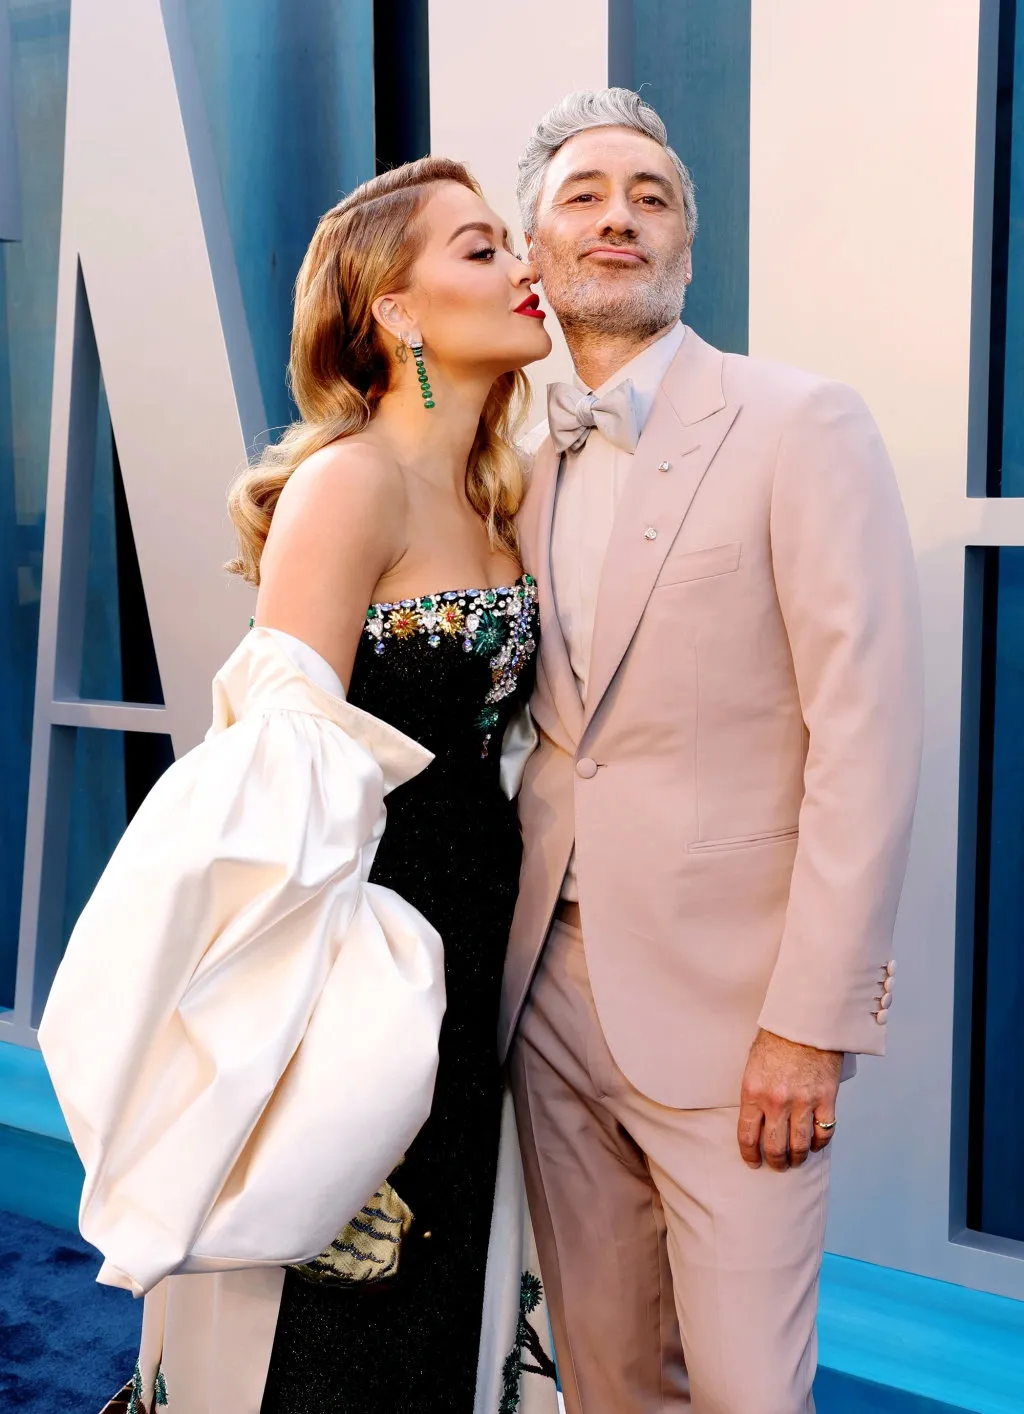 There are media reports that singer Rita Ora and director Taika Waititi are married in London | FMV6